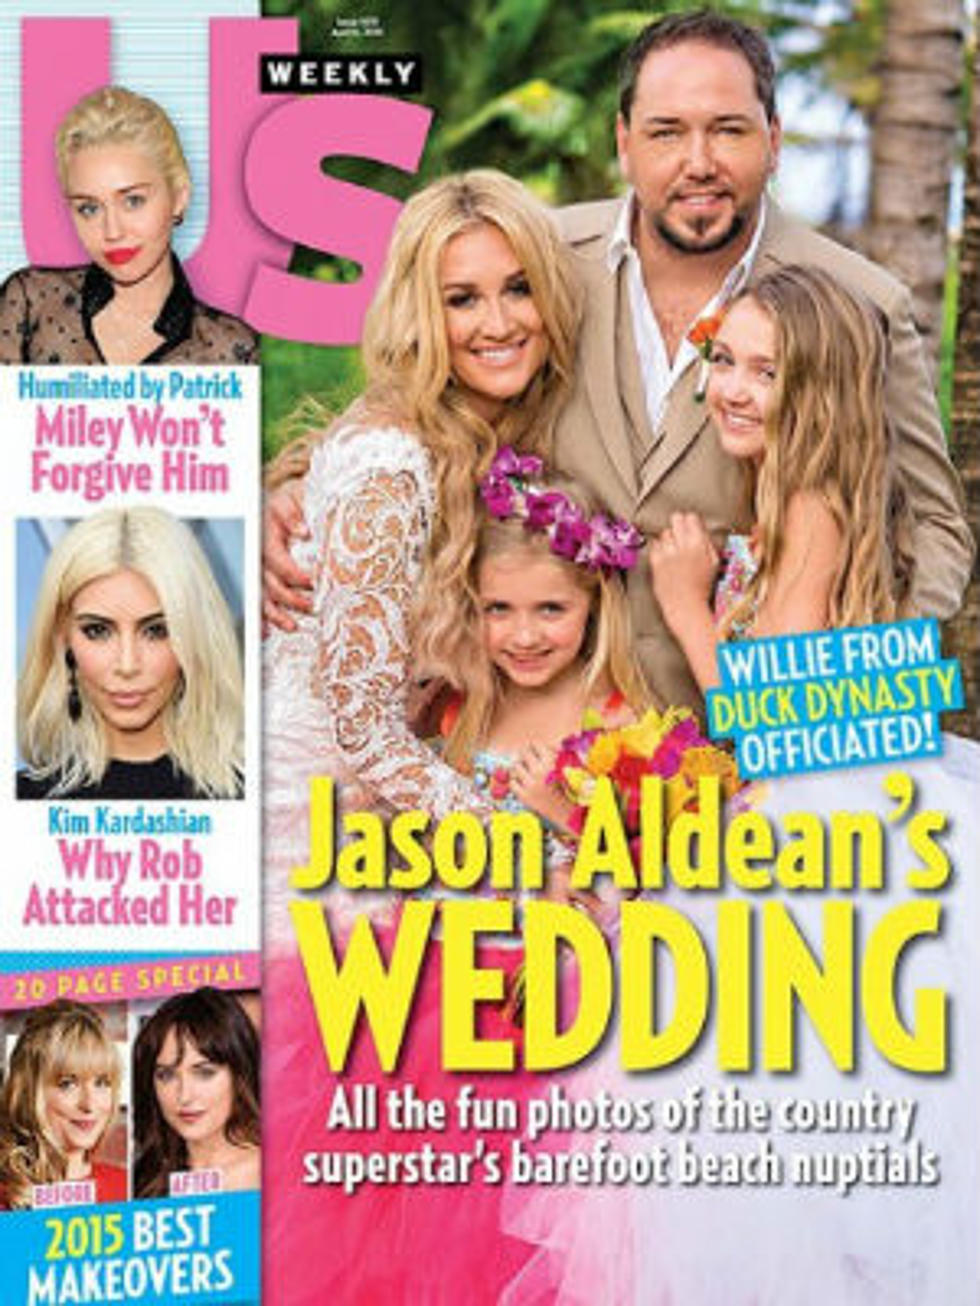 See Jason Aldean And Brittany Kerrs First Wedding Photo 